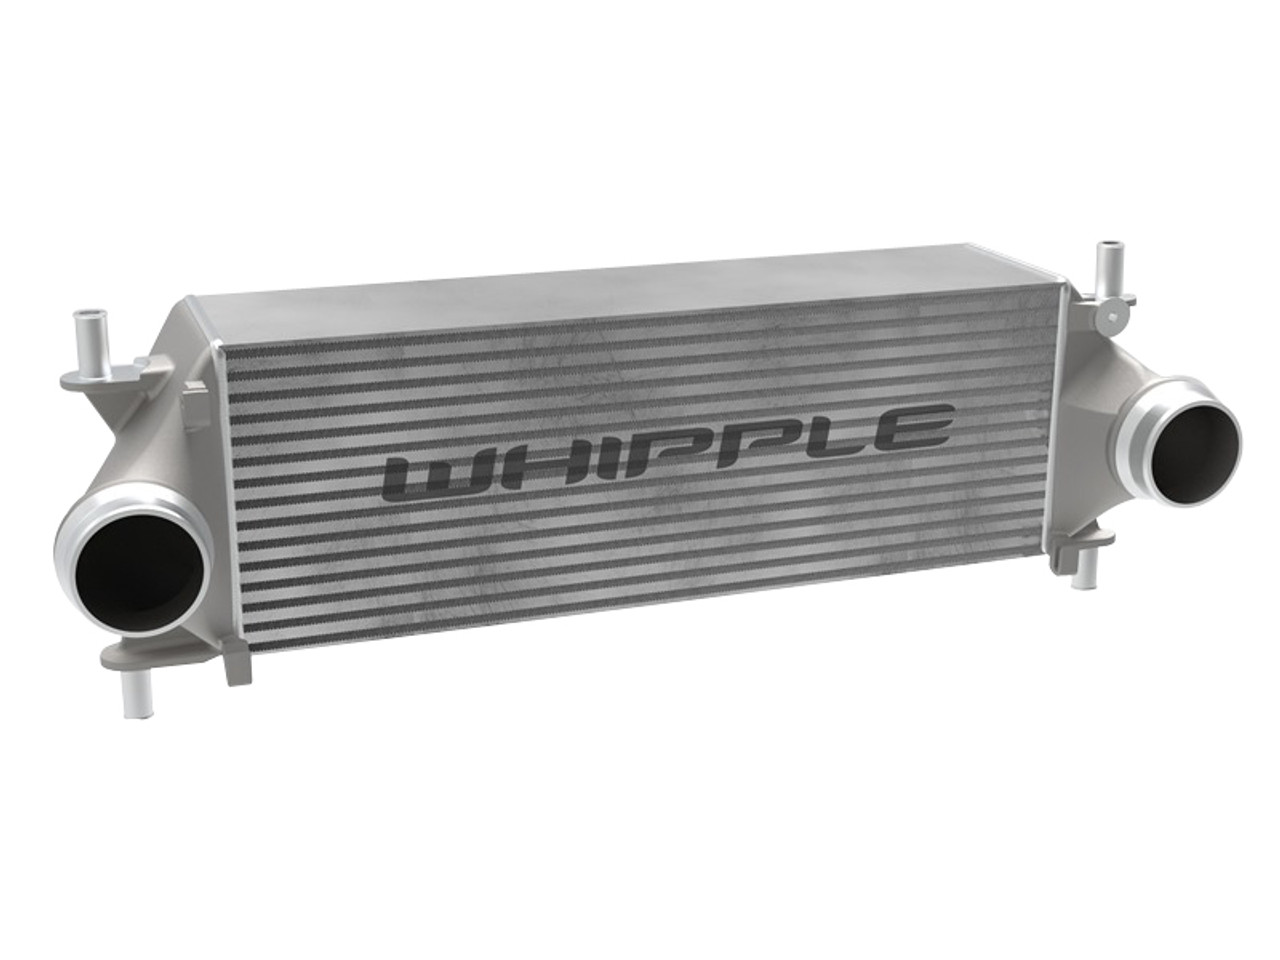 Whipple Stage 1 Upgrade Kit (2021-Up Ford Bronco 2.7L) EB-8180